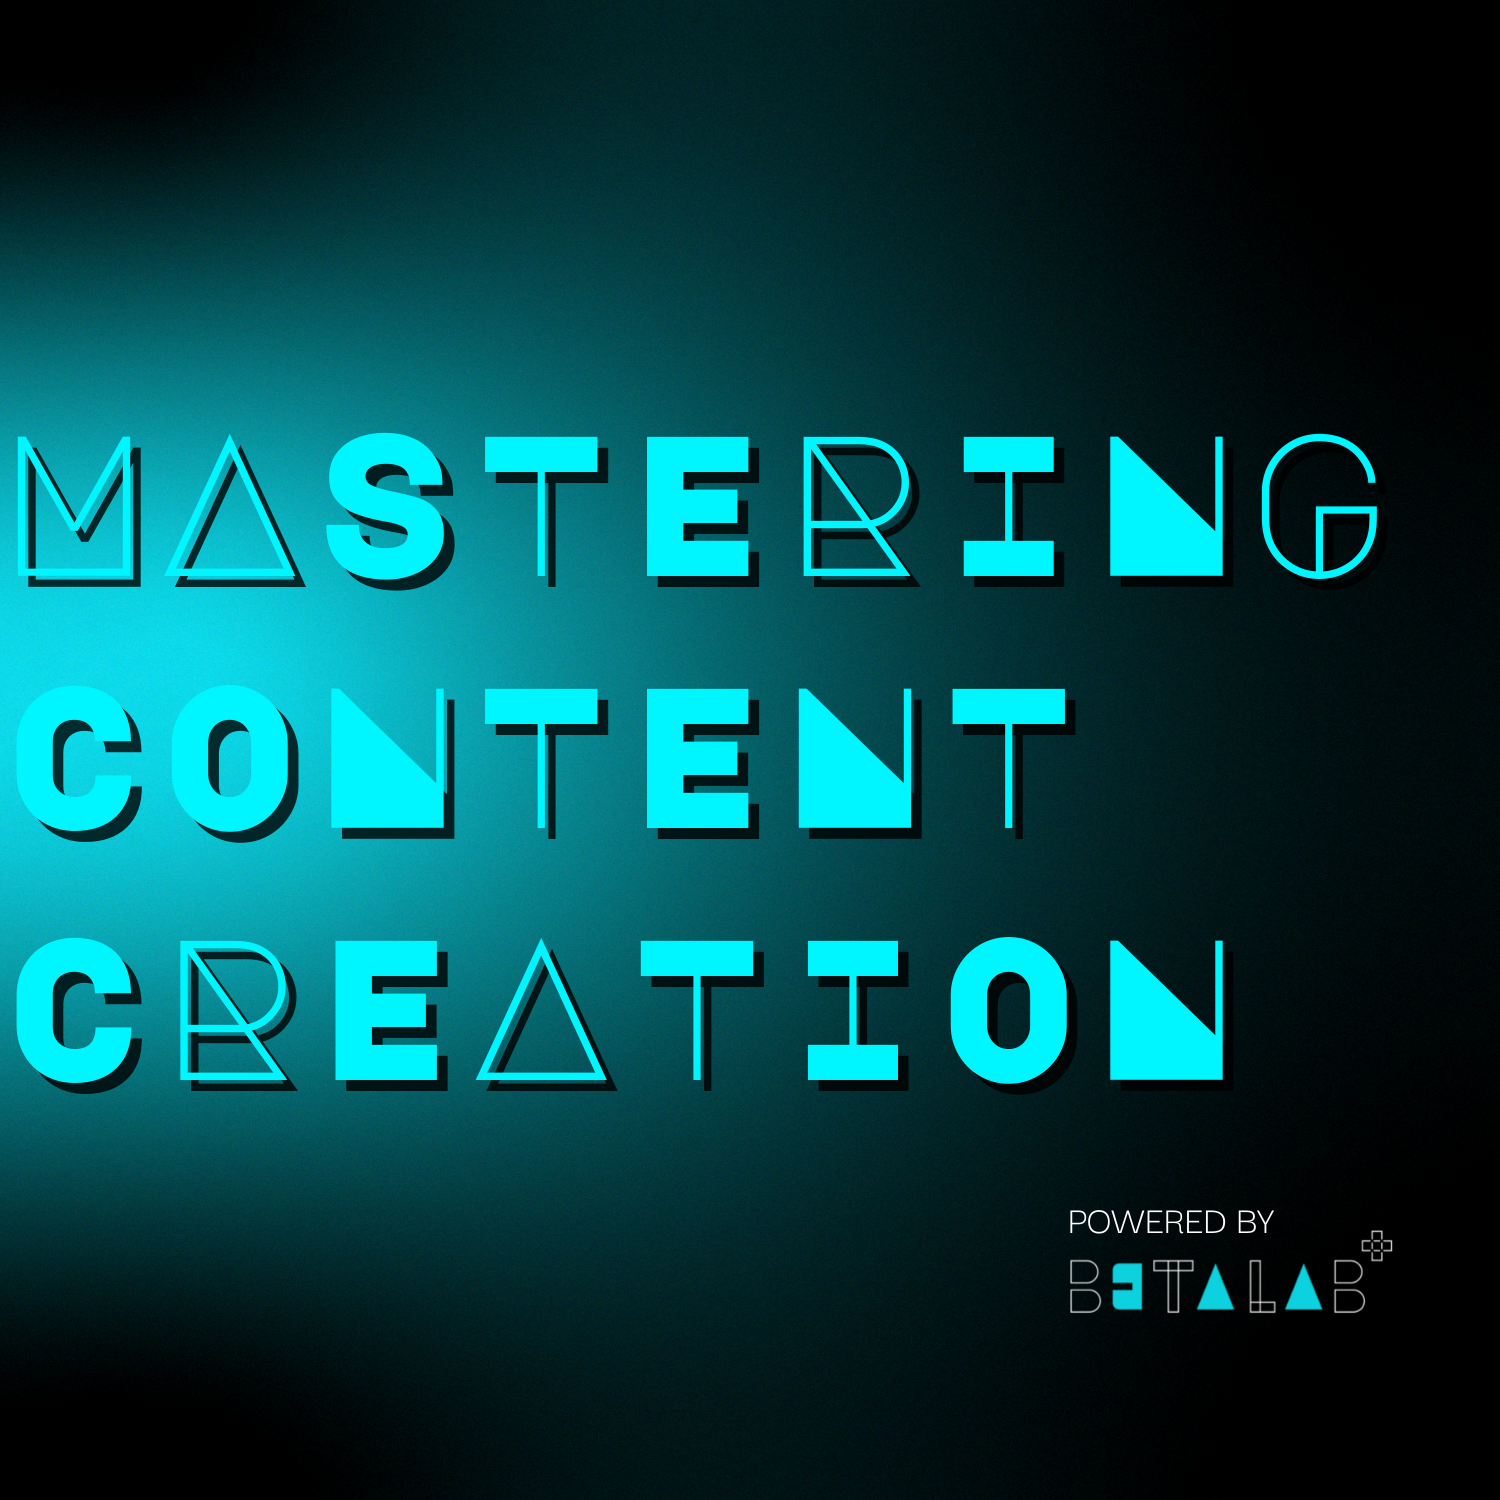 <font color="#oedied">MASTERING CONTENT CREATION